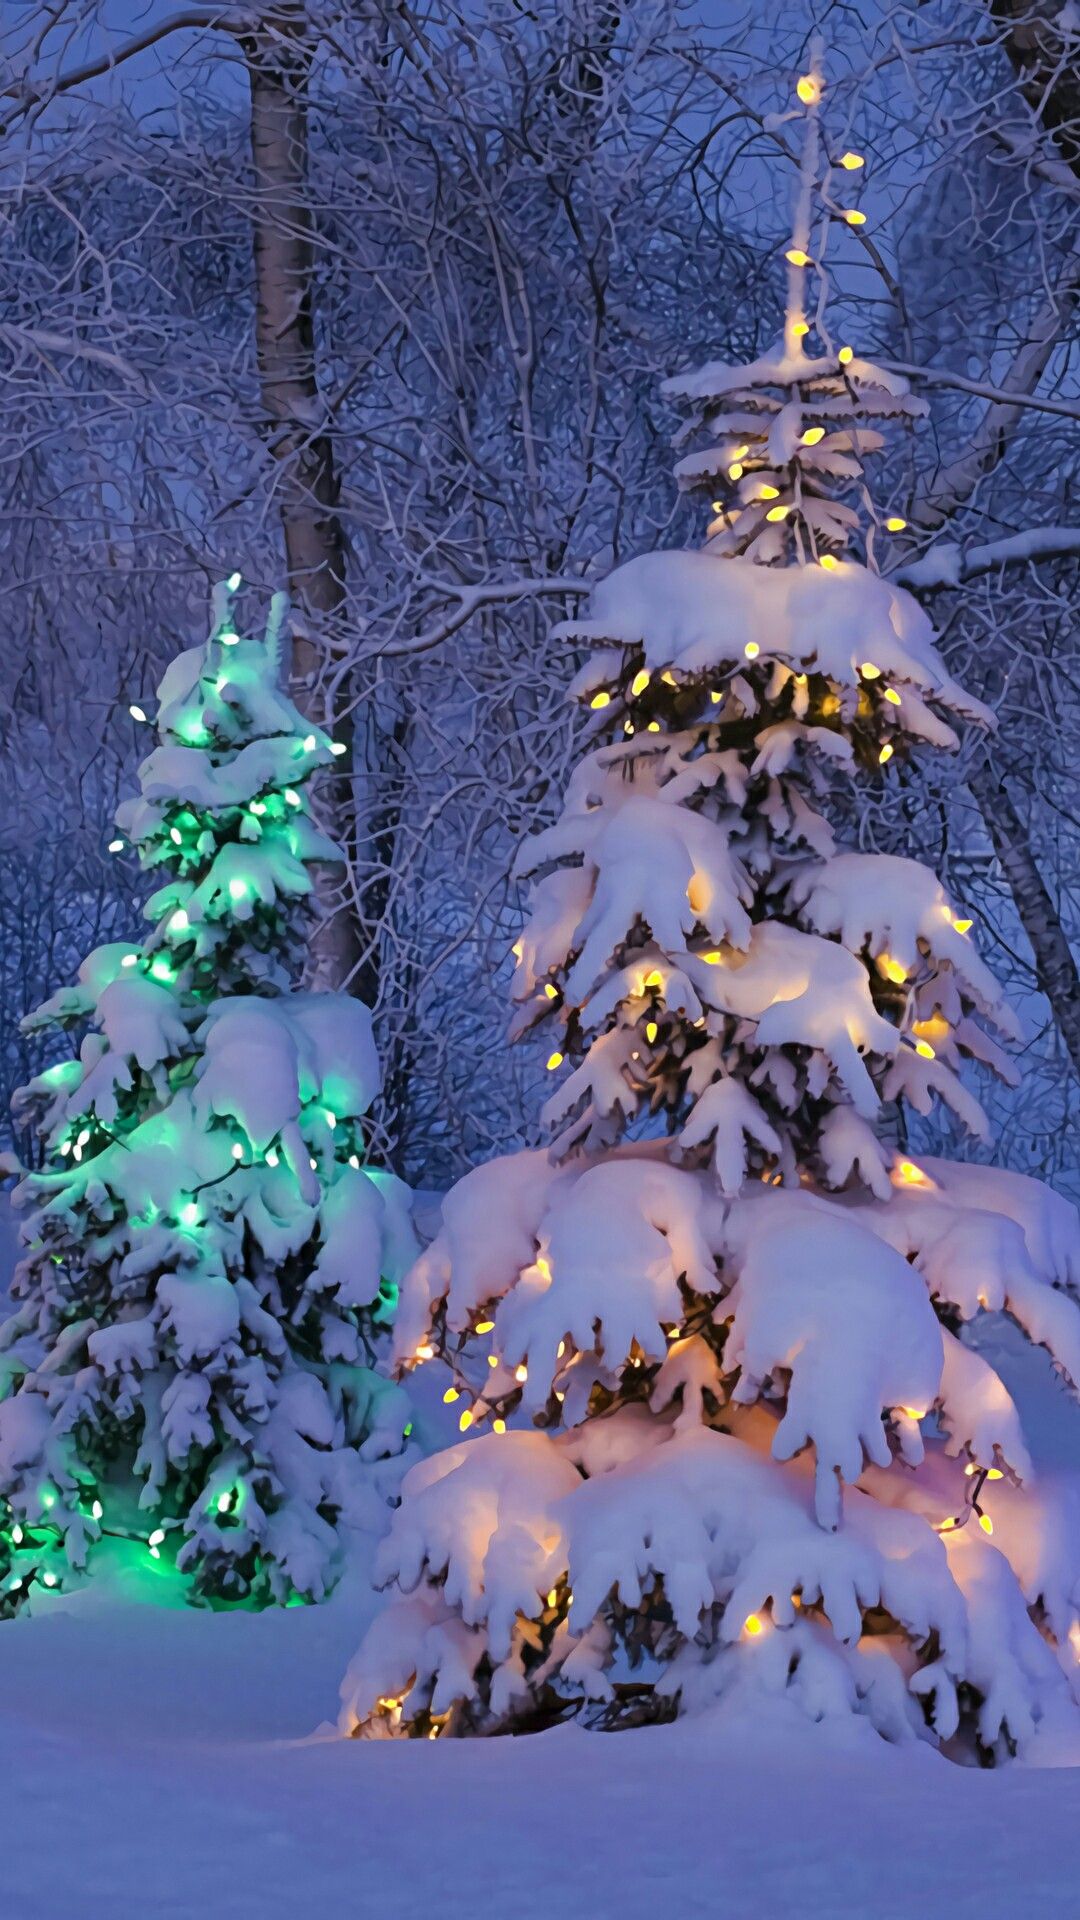 CELL PHONE WALLPAPER BACKGROUND. Christmas scenery, Christmas phone wallpaper, Christmas lights